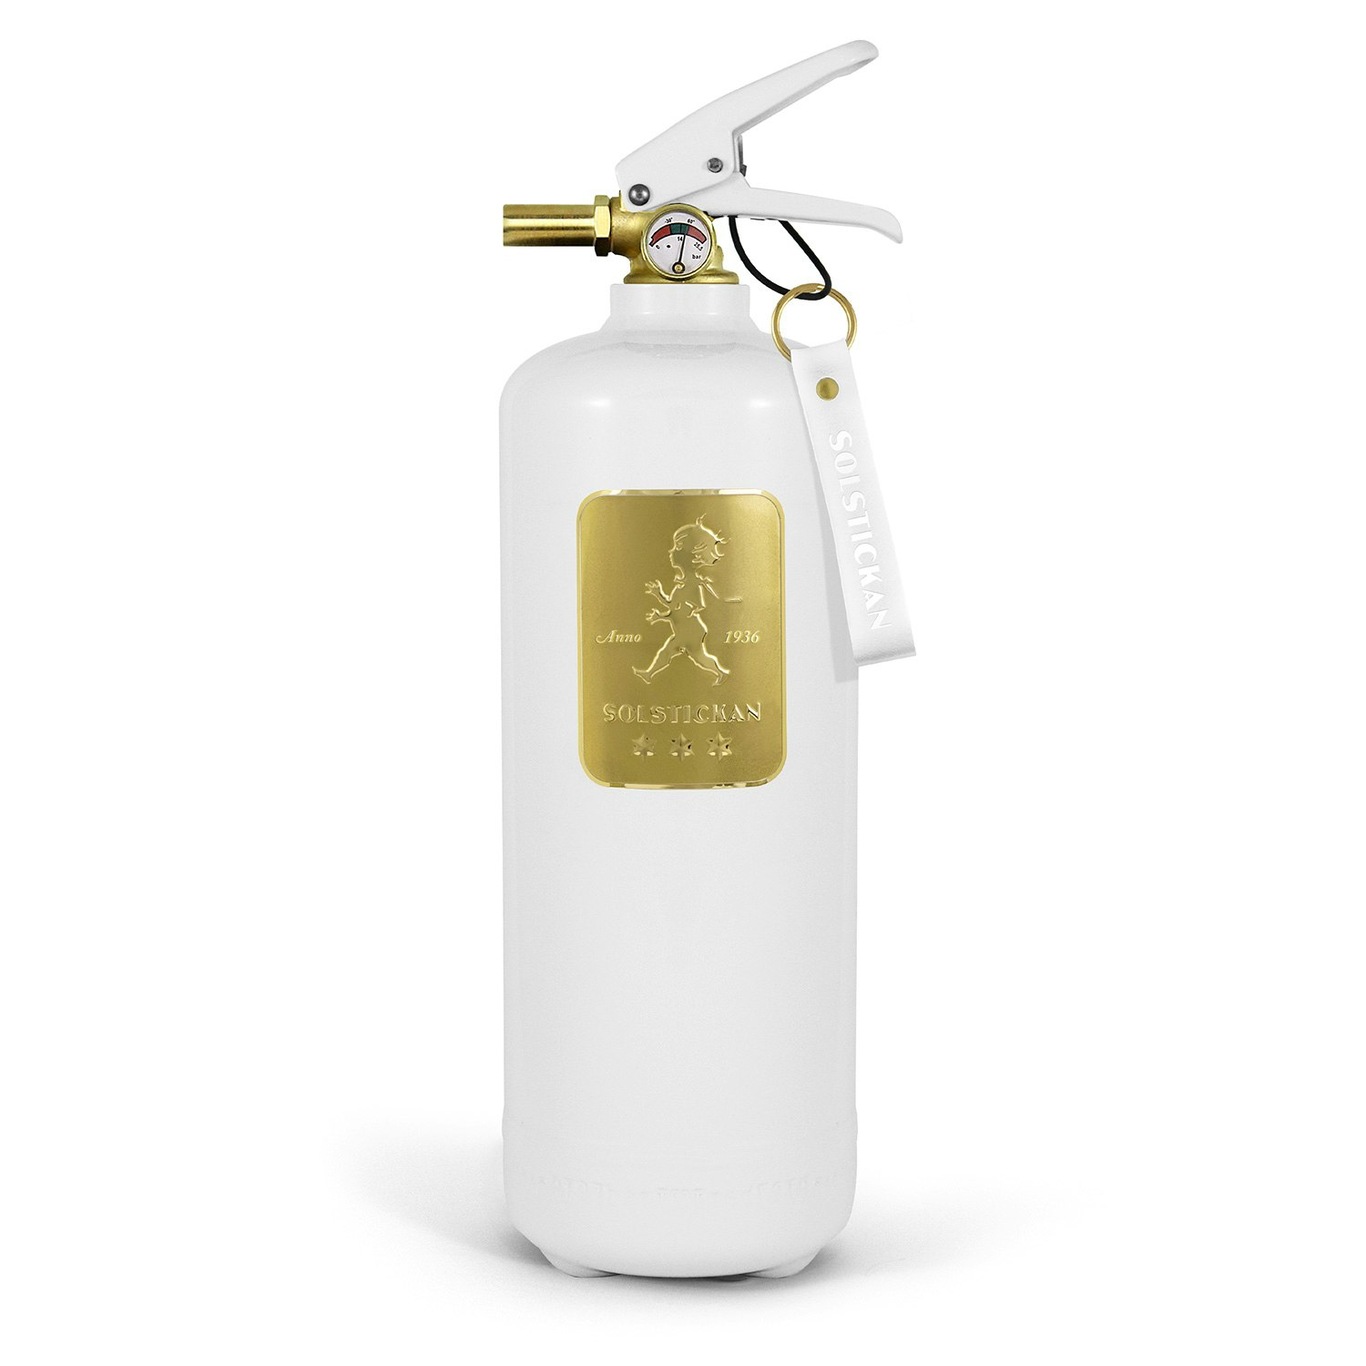 Solstickan Fire Extinguisher 2 kg, White/Gold